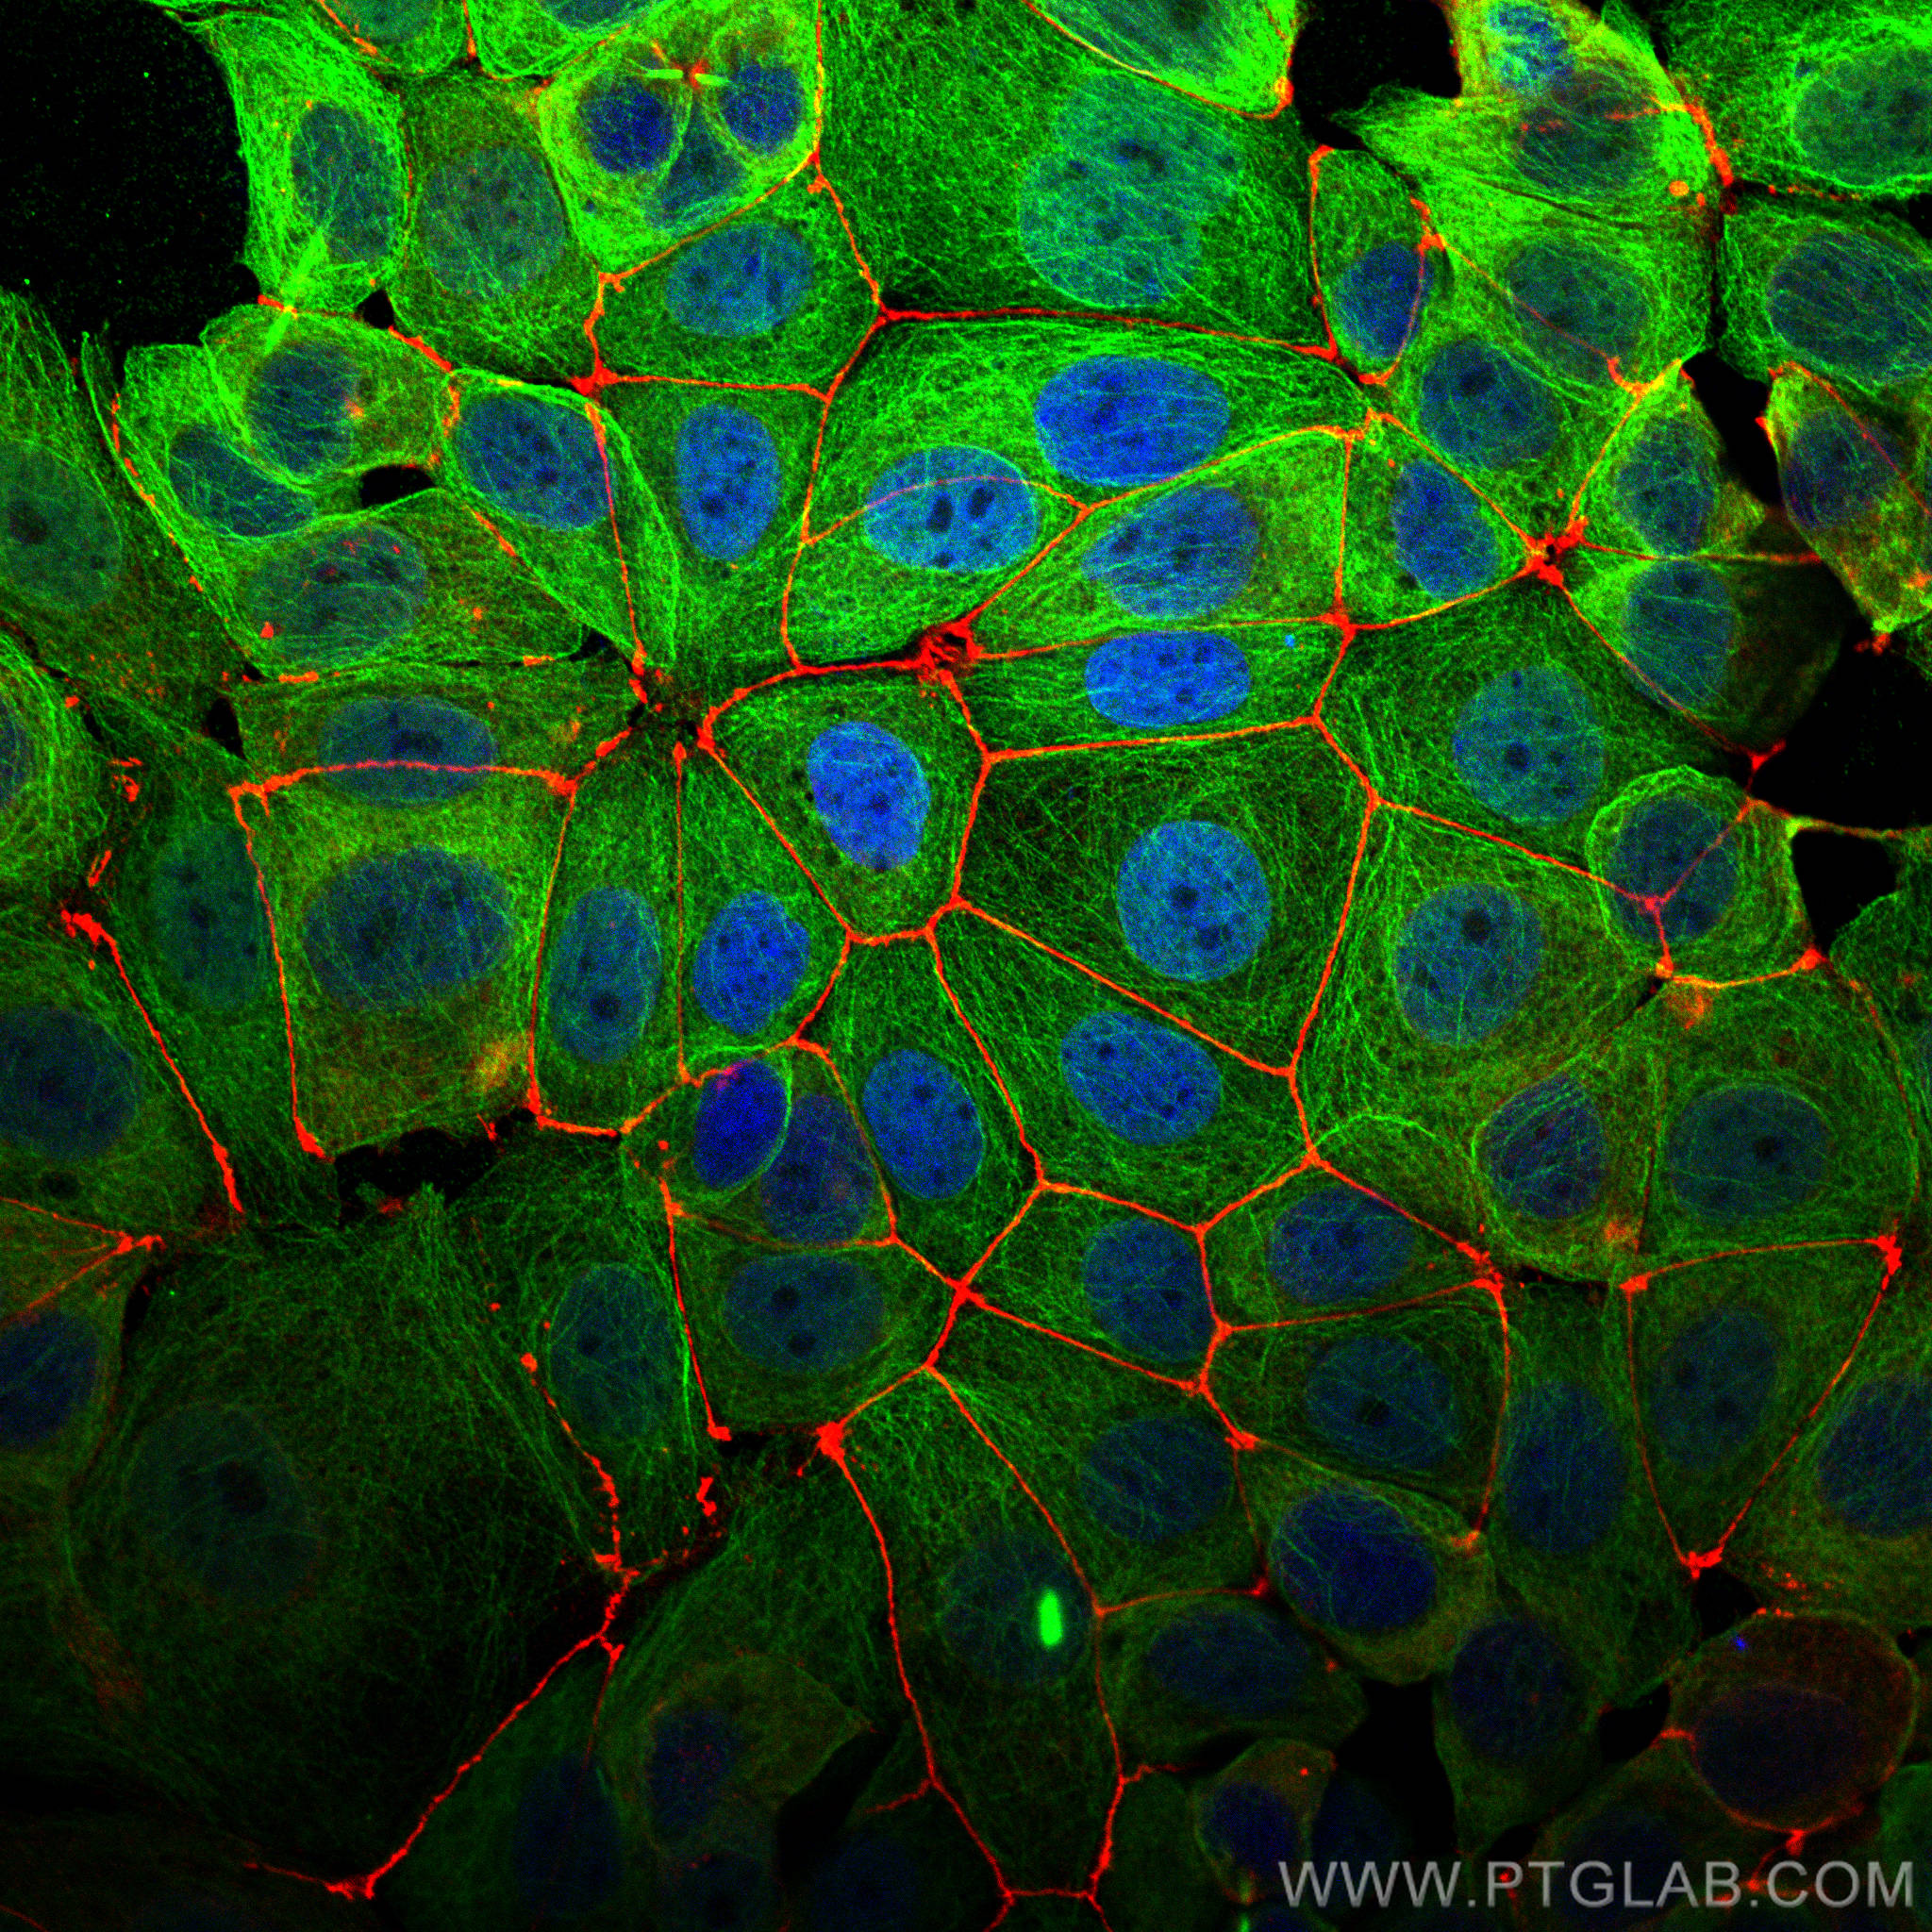 Immunofluorescence (IF) analysis of MCF-7 cells stained with rabbit anti-ZO1 polyclonal antibody (21773-1-AP, red) and mouse anti-Alpha Tubulin monoclonal antibody (66031-1-Ig, green). Multi-rAb CoraLite® Plus 594-Goat Anti-Rabbit Recombinant Secondary Antibody (H+L) (RGAR004, 1:500) and Multi-rAb CoraLite® Plus 488-Goat Anti-Mouse Recombinant Secondary Antibody (H+L)(RGAM002, 1:500) were used for detection.  